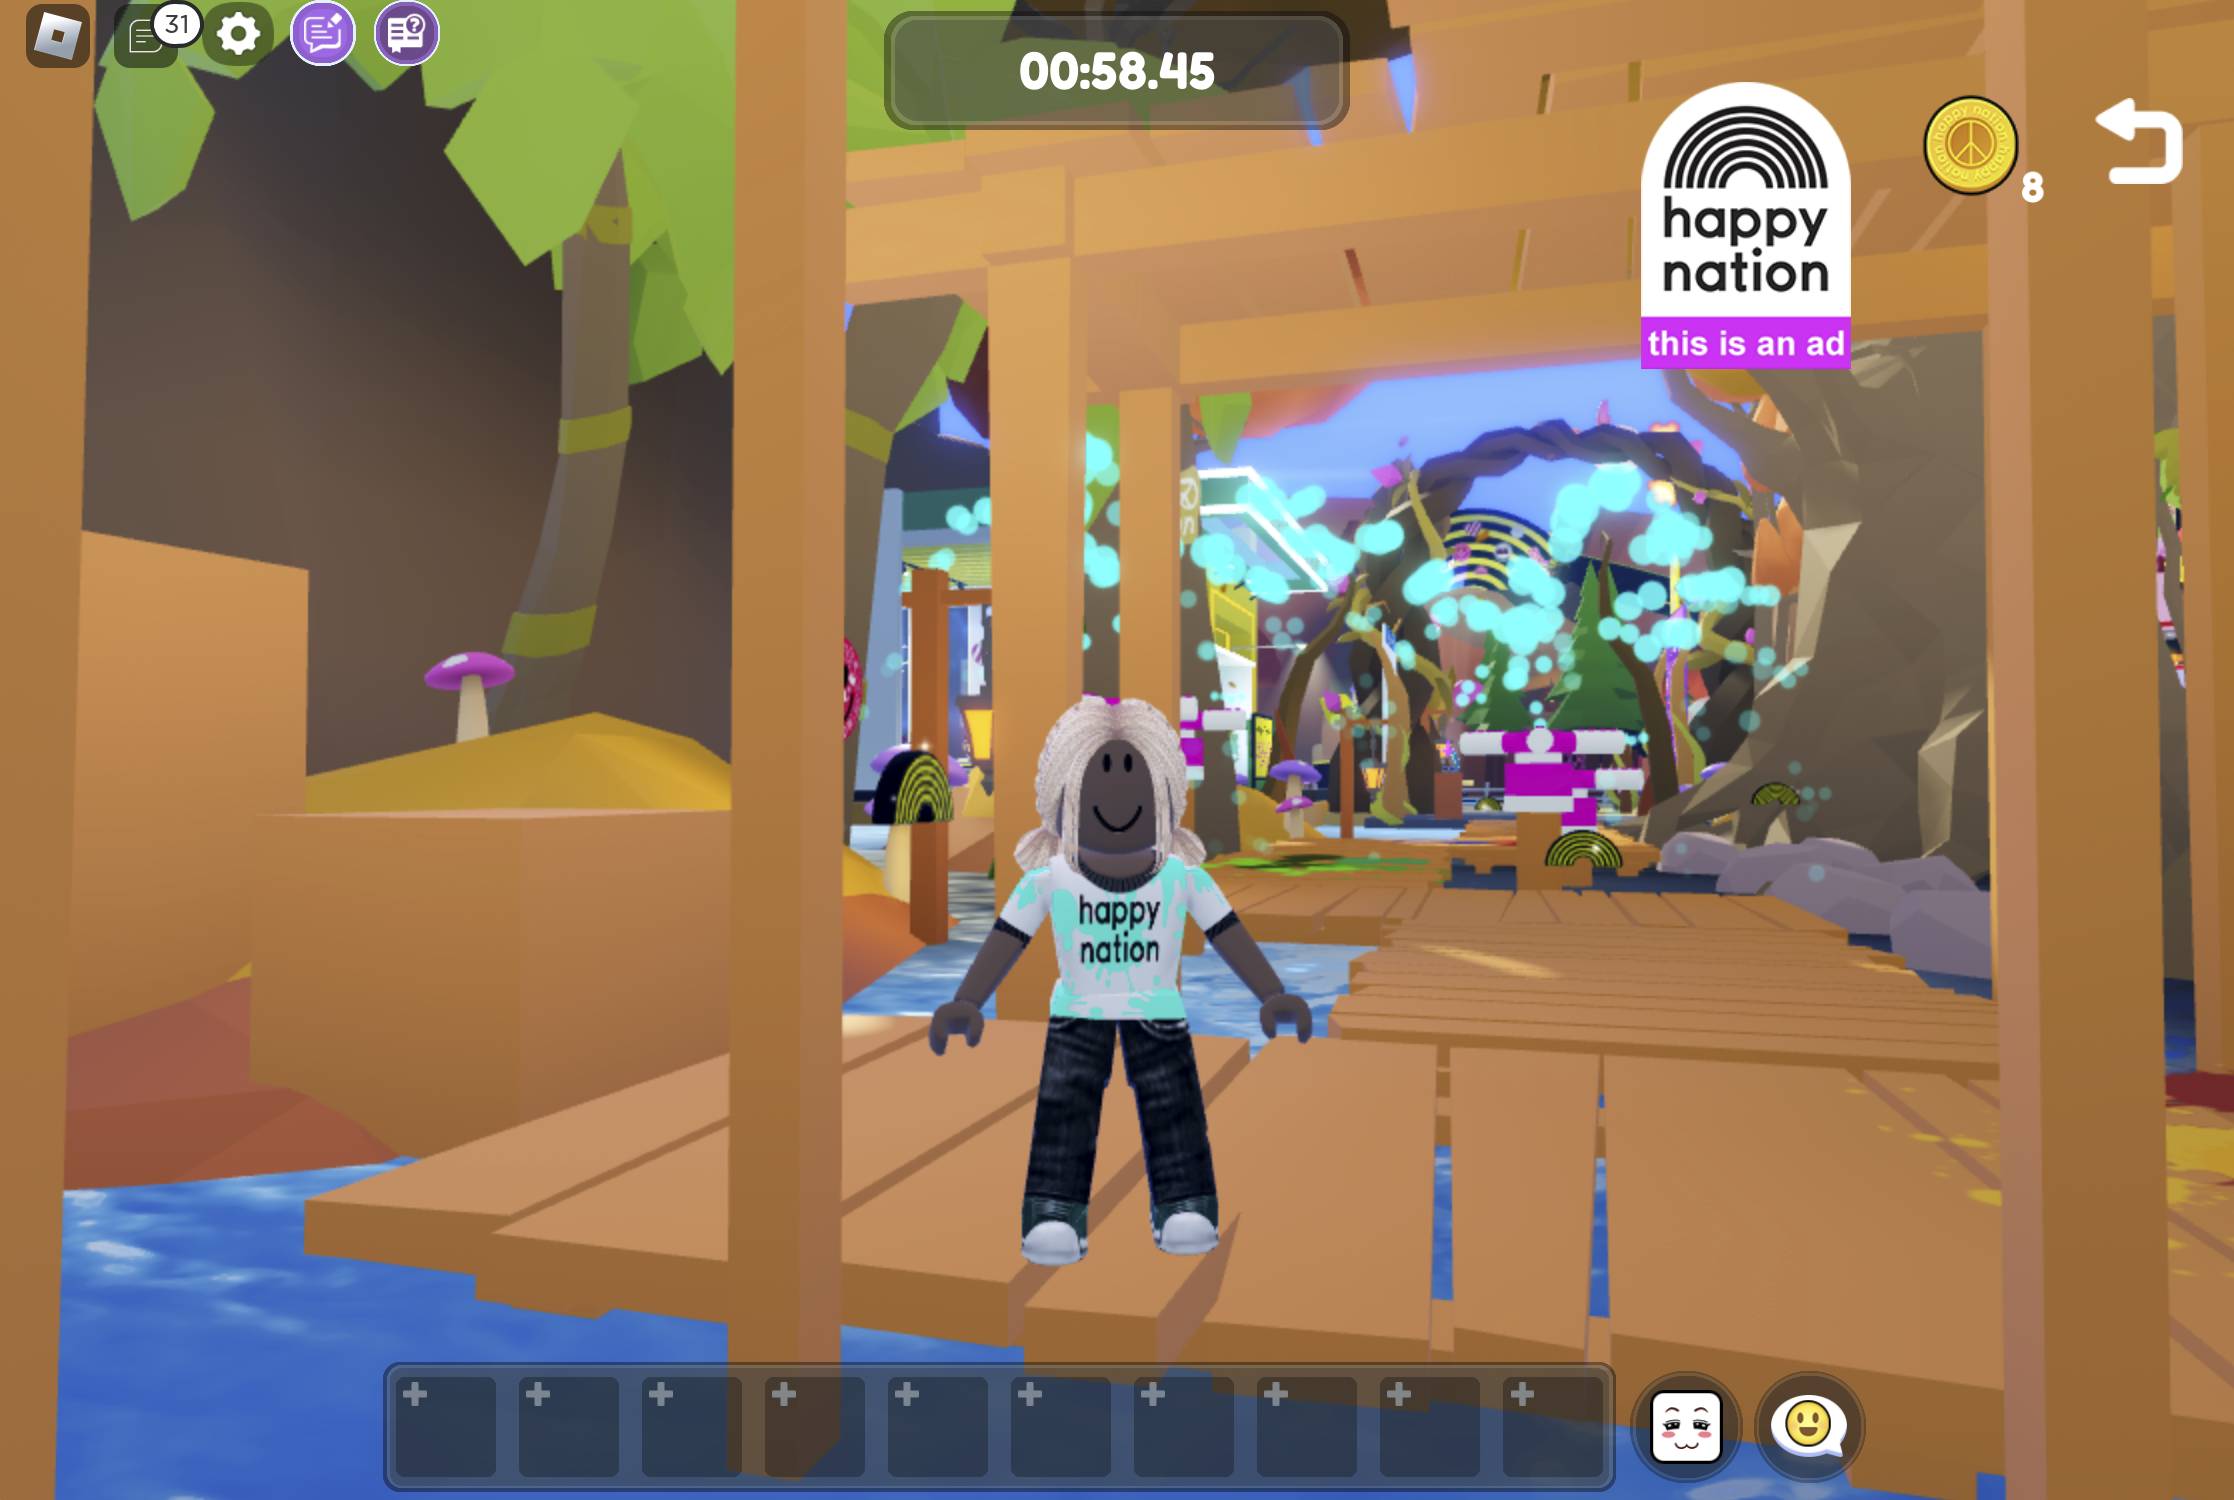 VS&Co's Happy Nation playable area in Roblox